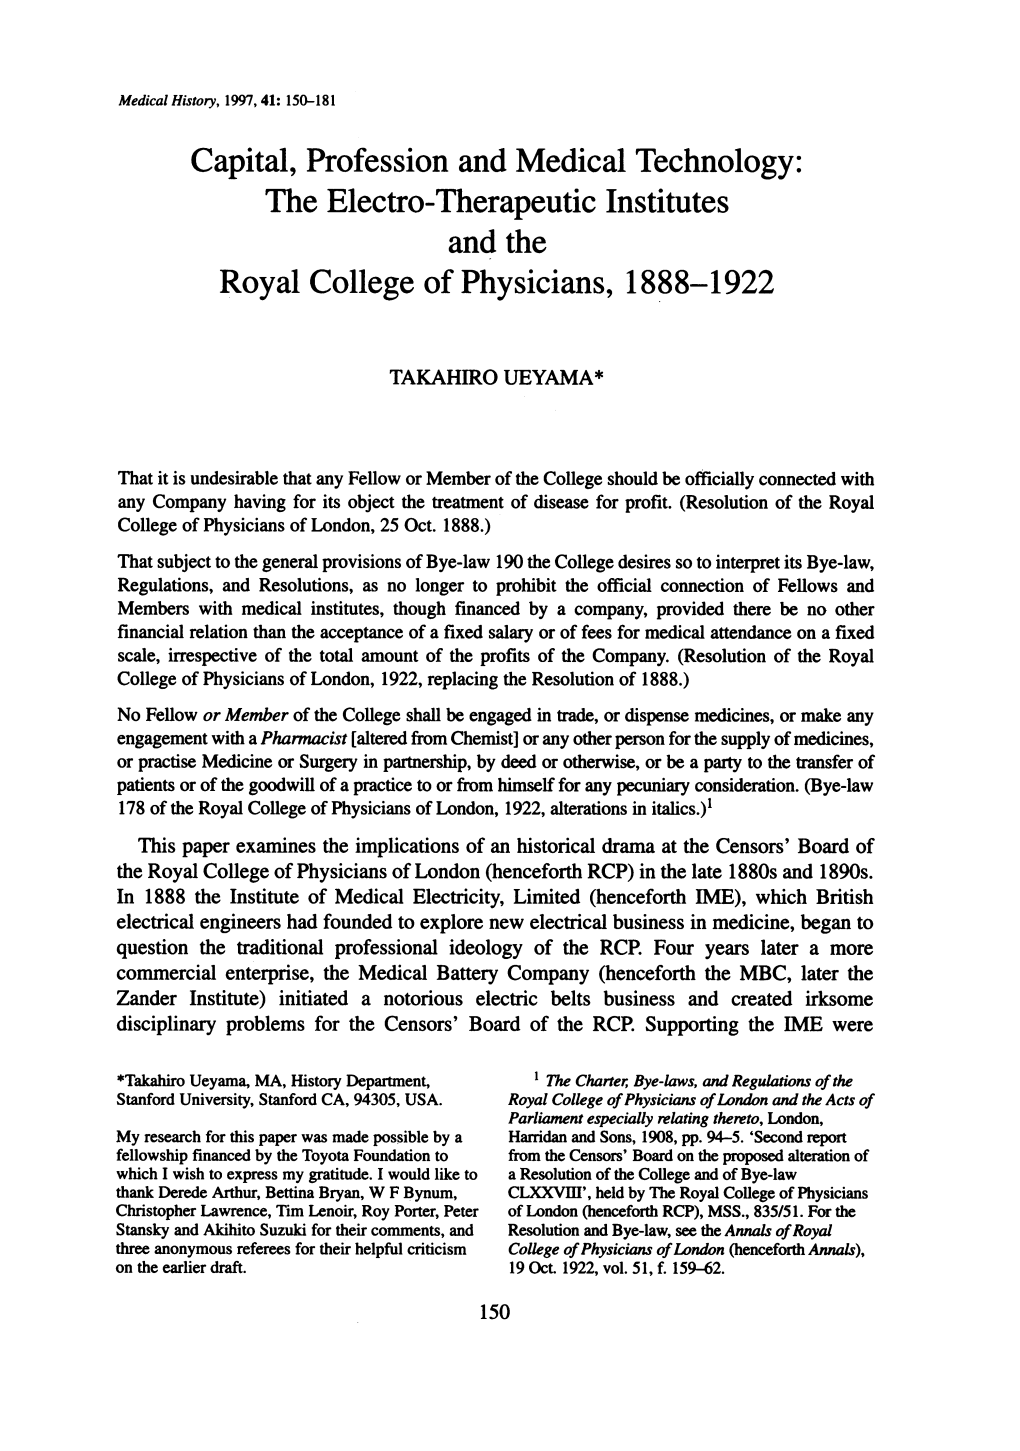 Capital, Profession and Medical Technology: the Electro-Therapeutic Institutes and the Royal College of Physicians, 1888-1922